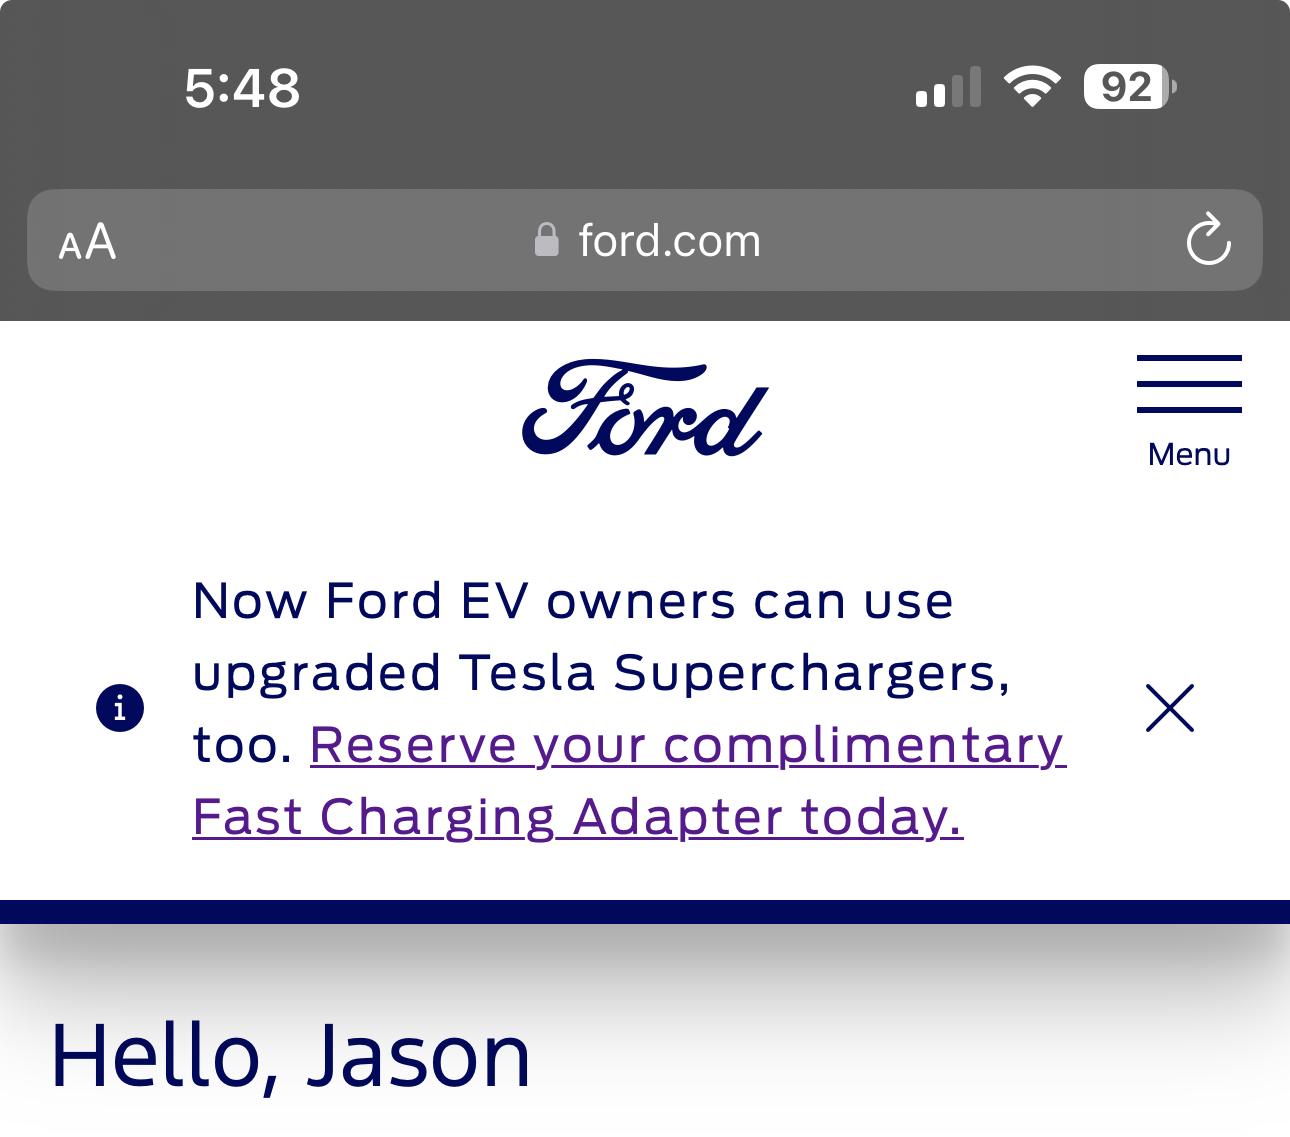 Ford F-150 Lightning Update: F-150 Lightning Fast Charging Tesla Adapters Start Shipping TODAY Per Ford! IMG_4412